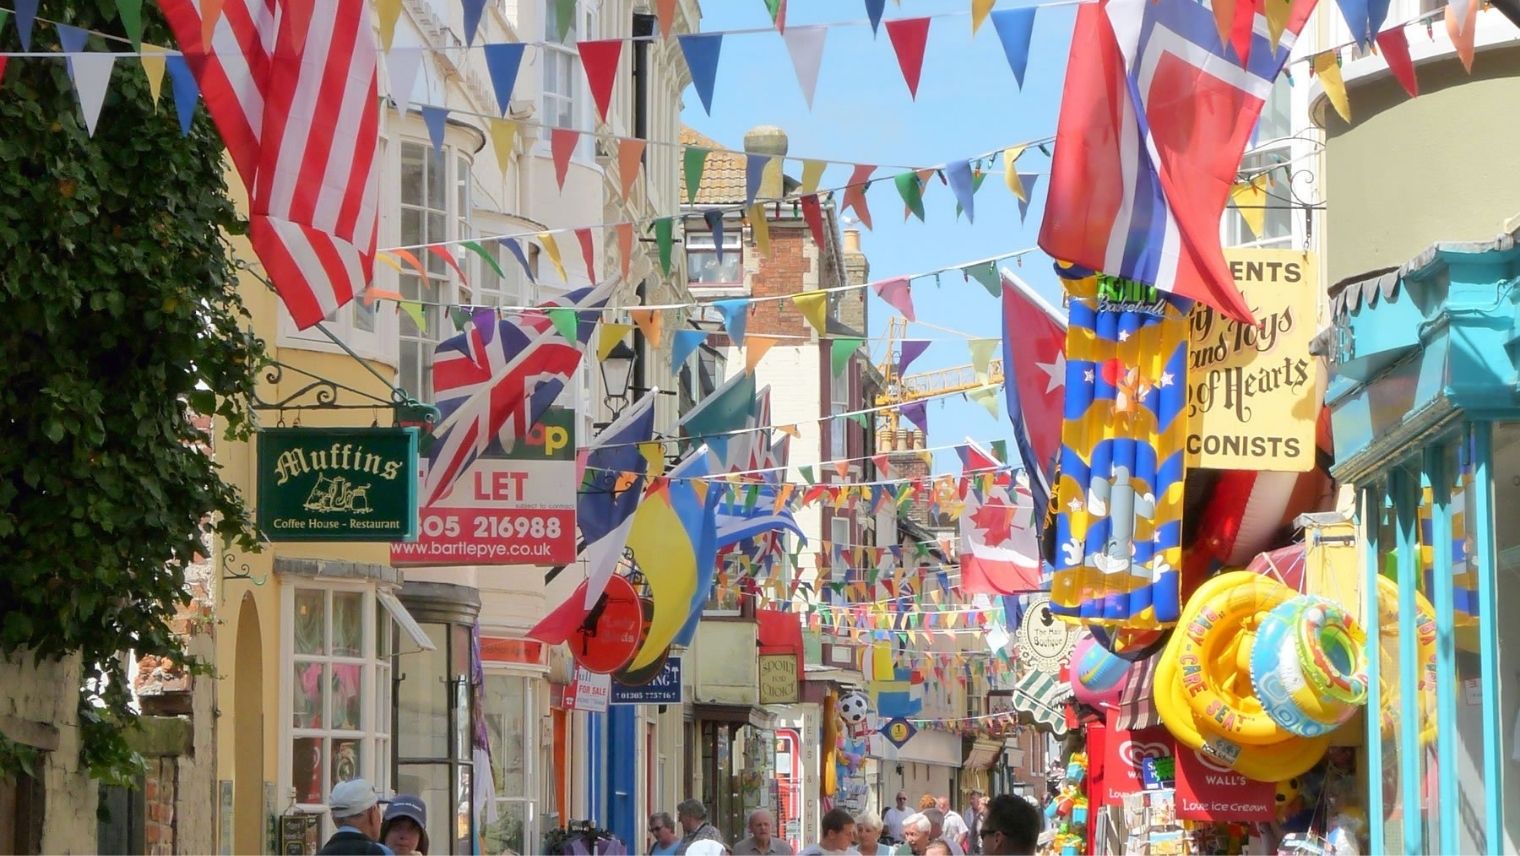 A large range of shops await to be discovered in Weymouth